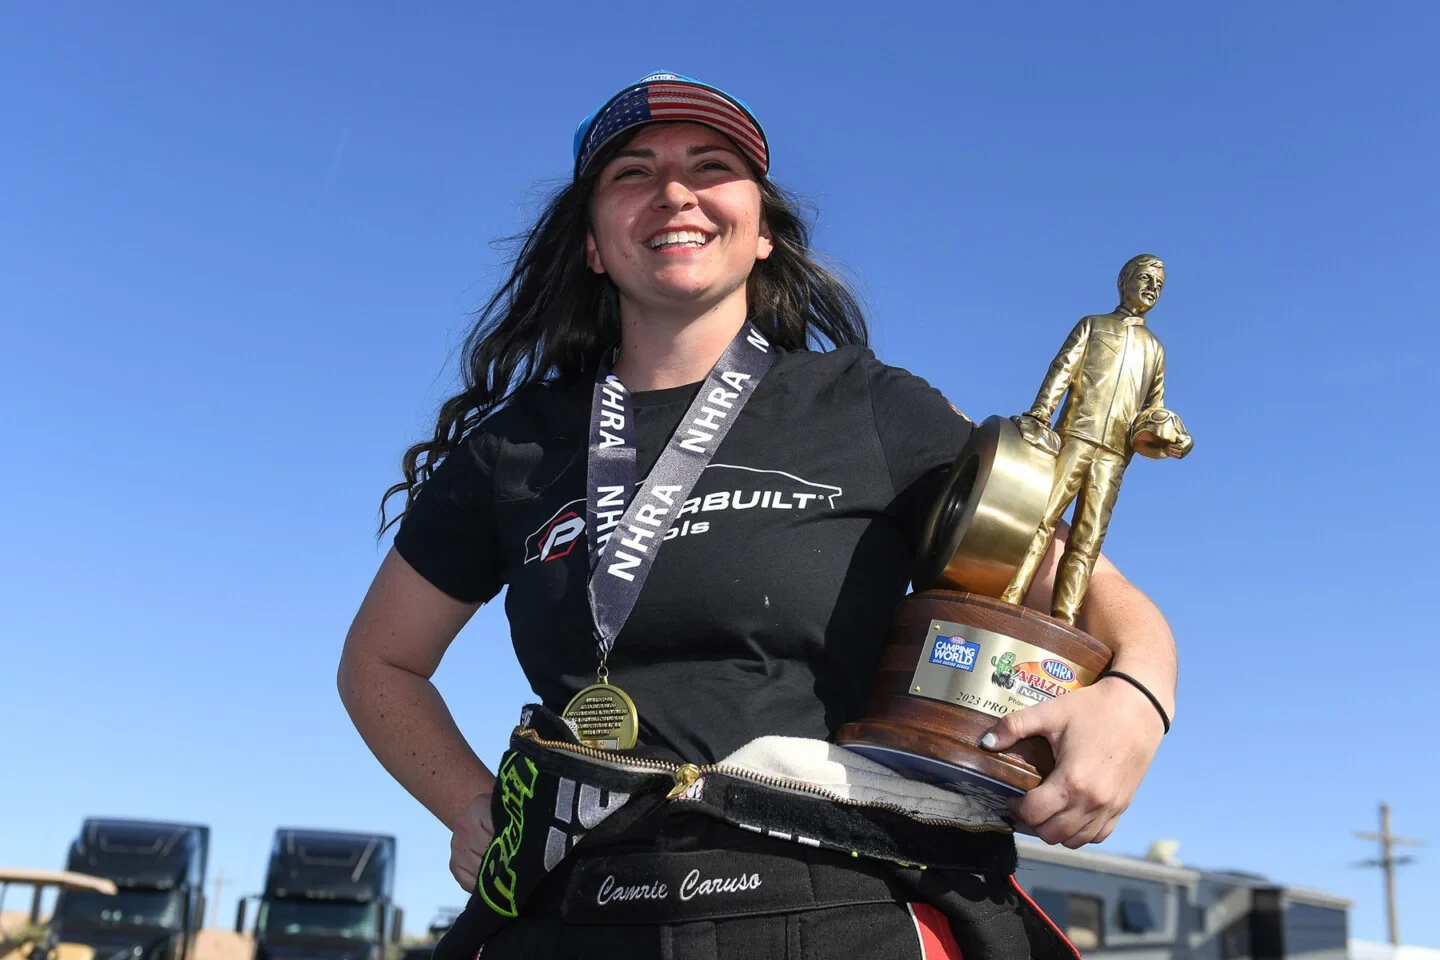 Camrie Caruso Earns Her First NHRA Pro Stock Victory at the Arizona Nationals